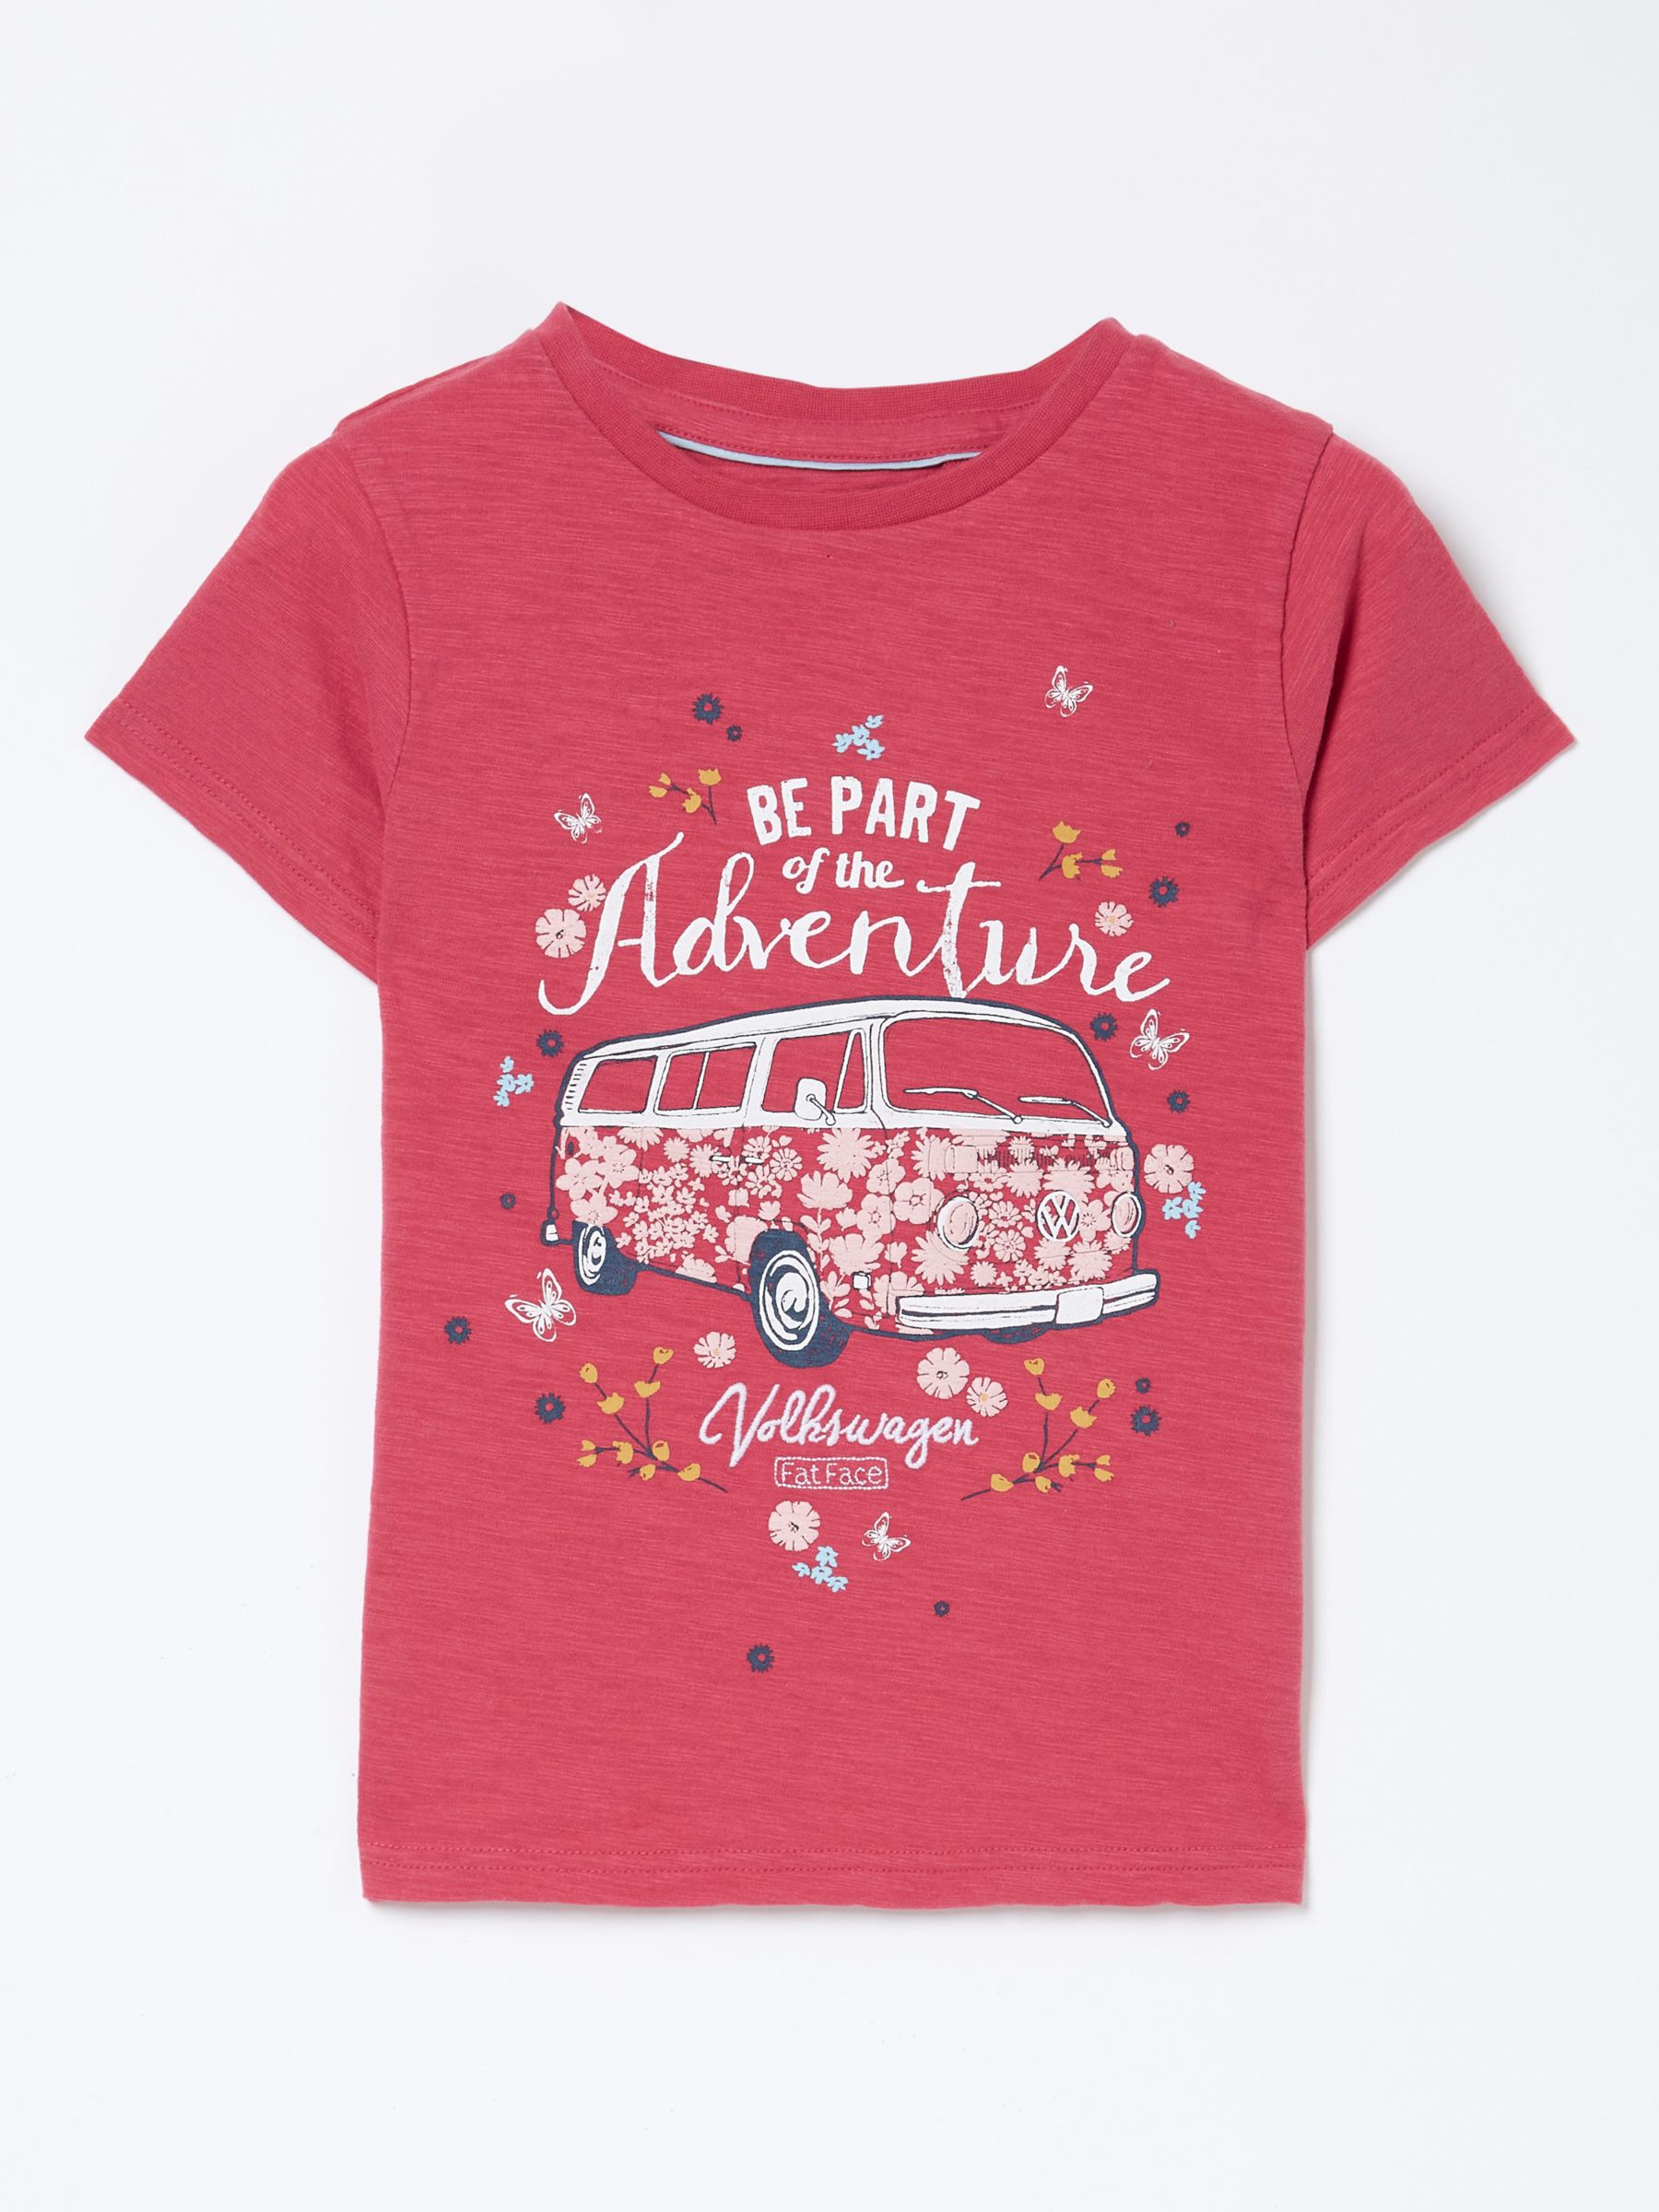 FatFace Kids' Volkswagon Graphic Cotton T-Shirt, Raspberry Red